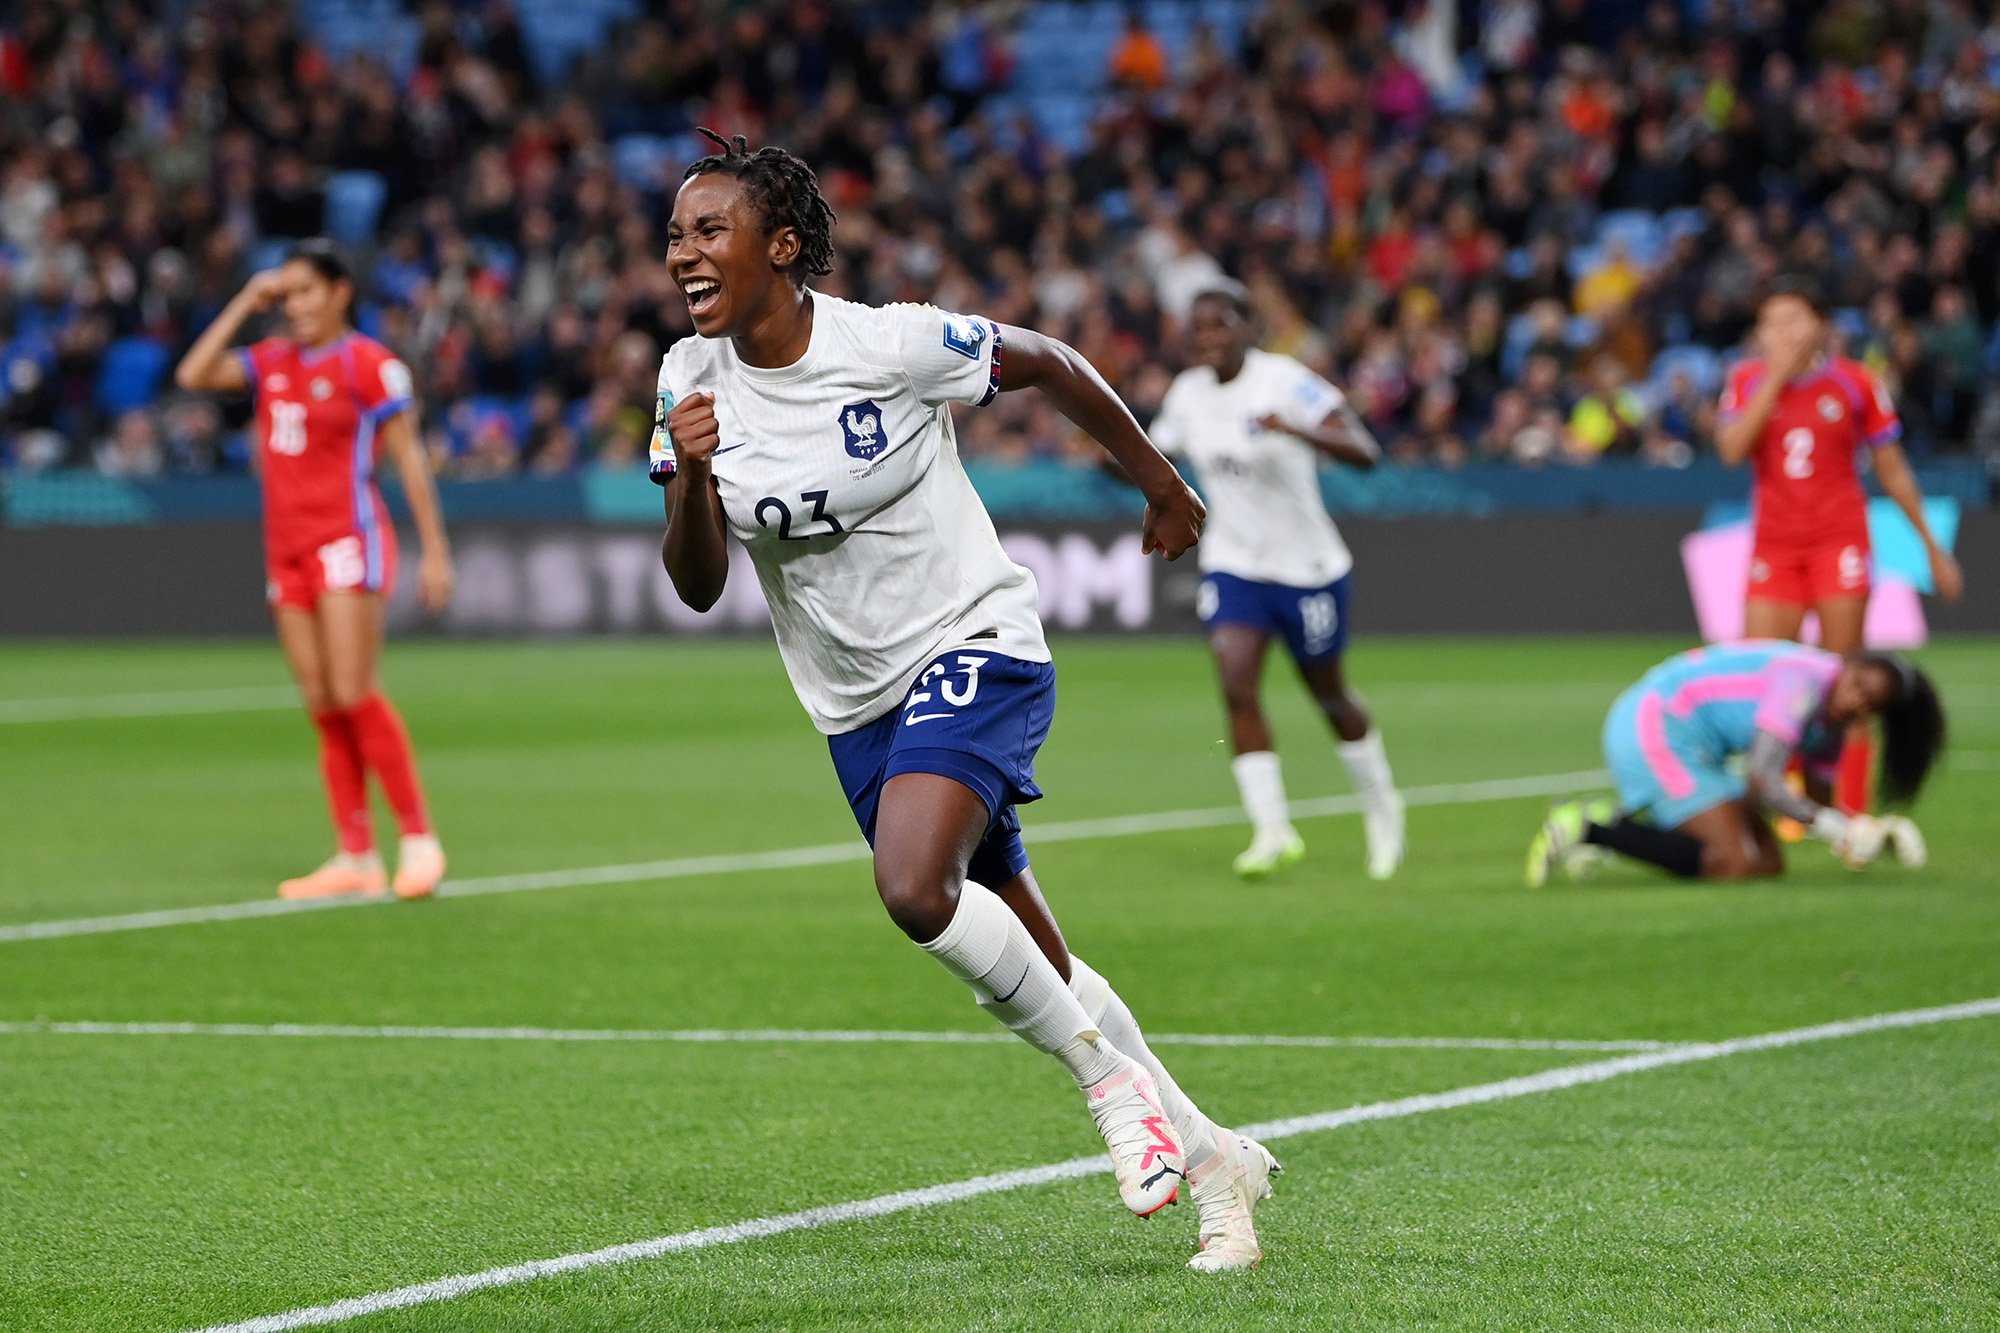 Vicki Becho of France celebrates after scoring her team's sixth goal during the FIFA Women's World Cup Australia & New Zealand 2023 Group F match between Panama and France at Sydney Football Stadium on August 2 in Sydney, Australia.